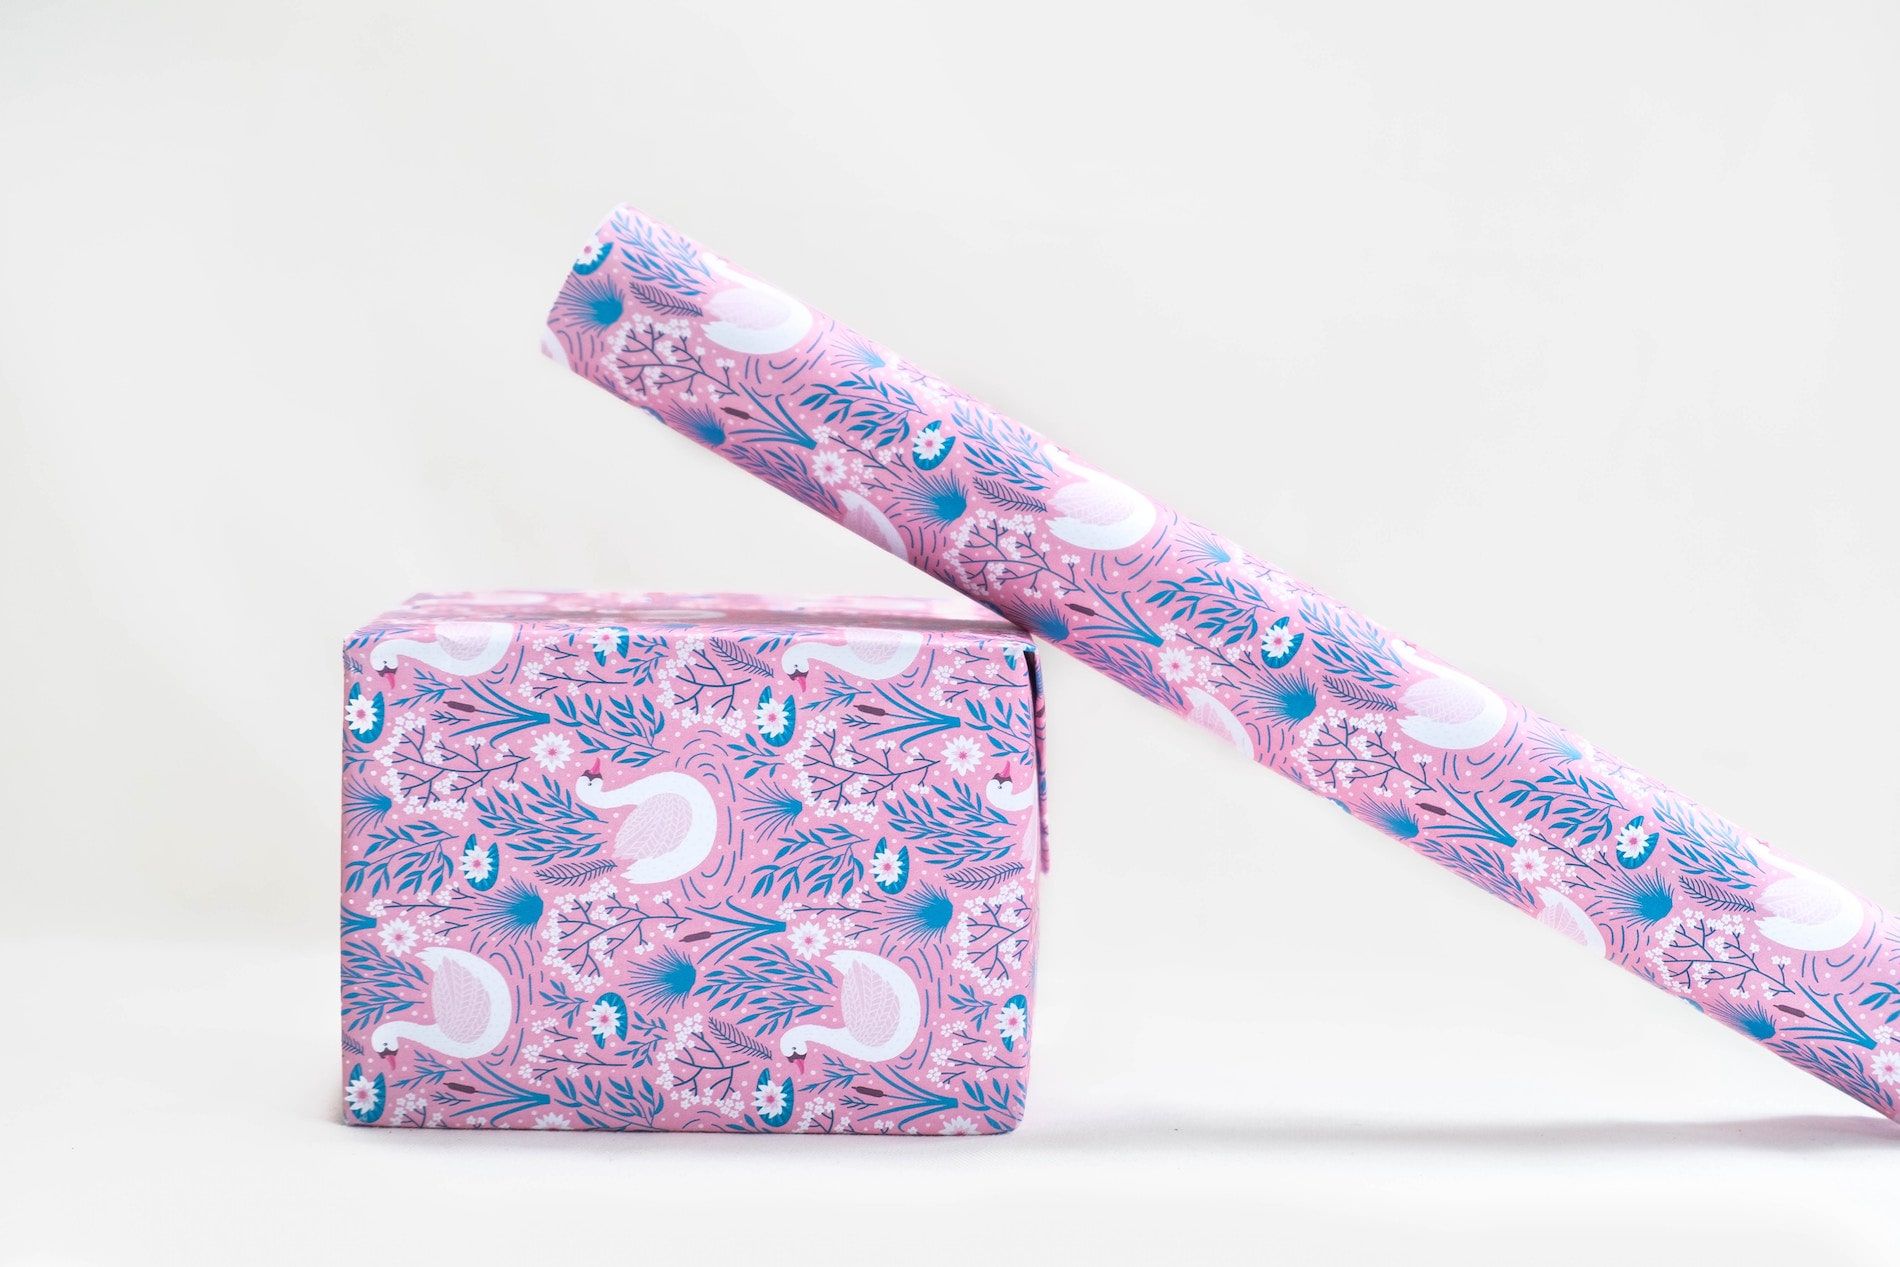 Why You Should Offer Free Gift-Wrapping on Your Ecommerce Site